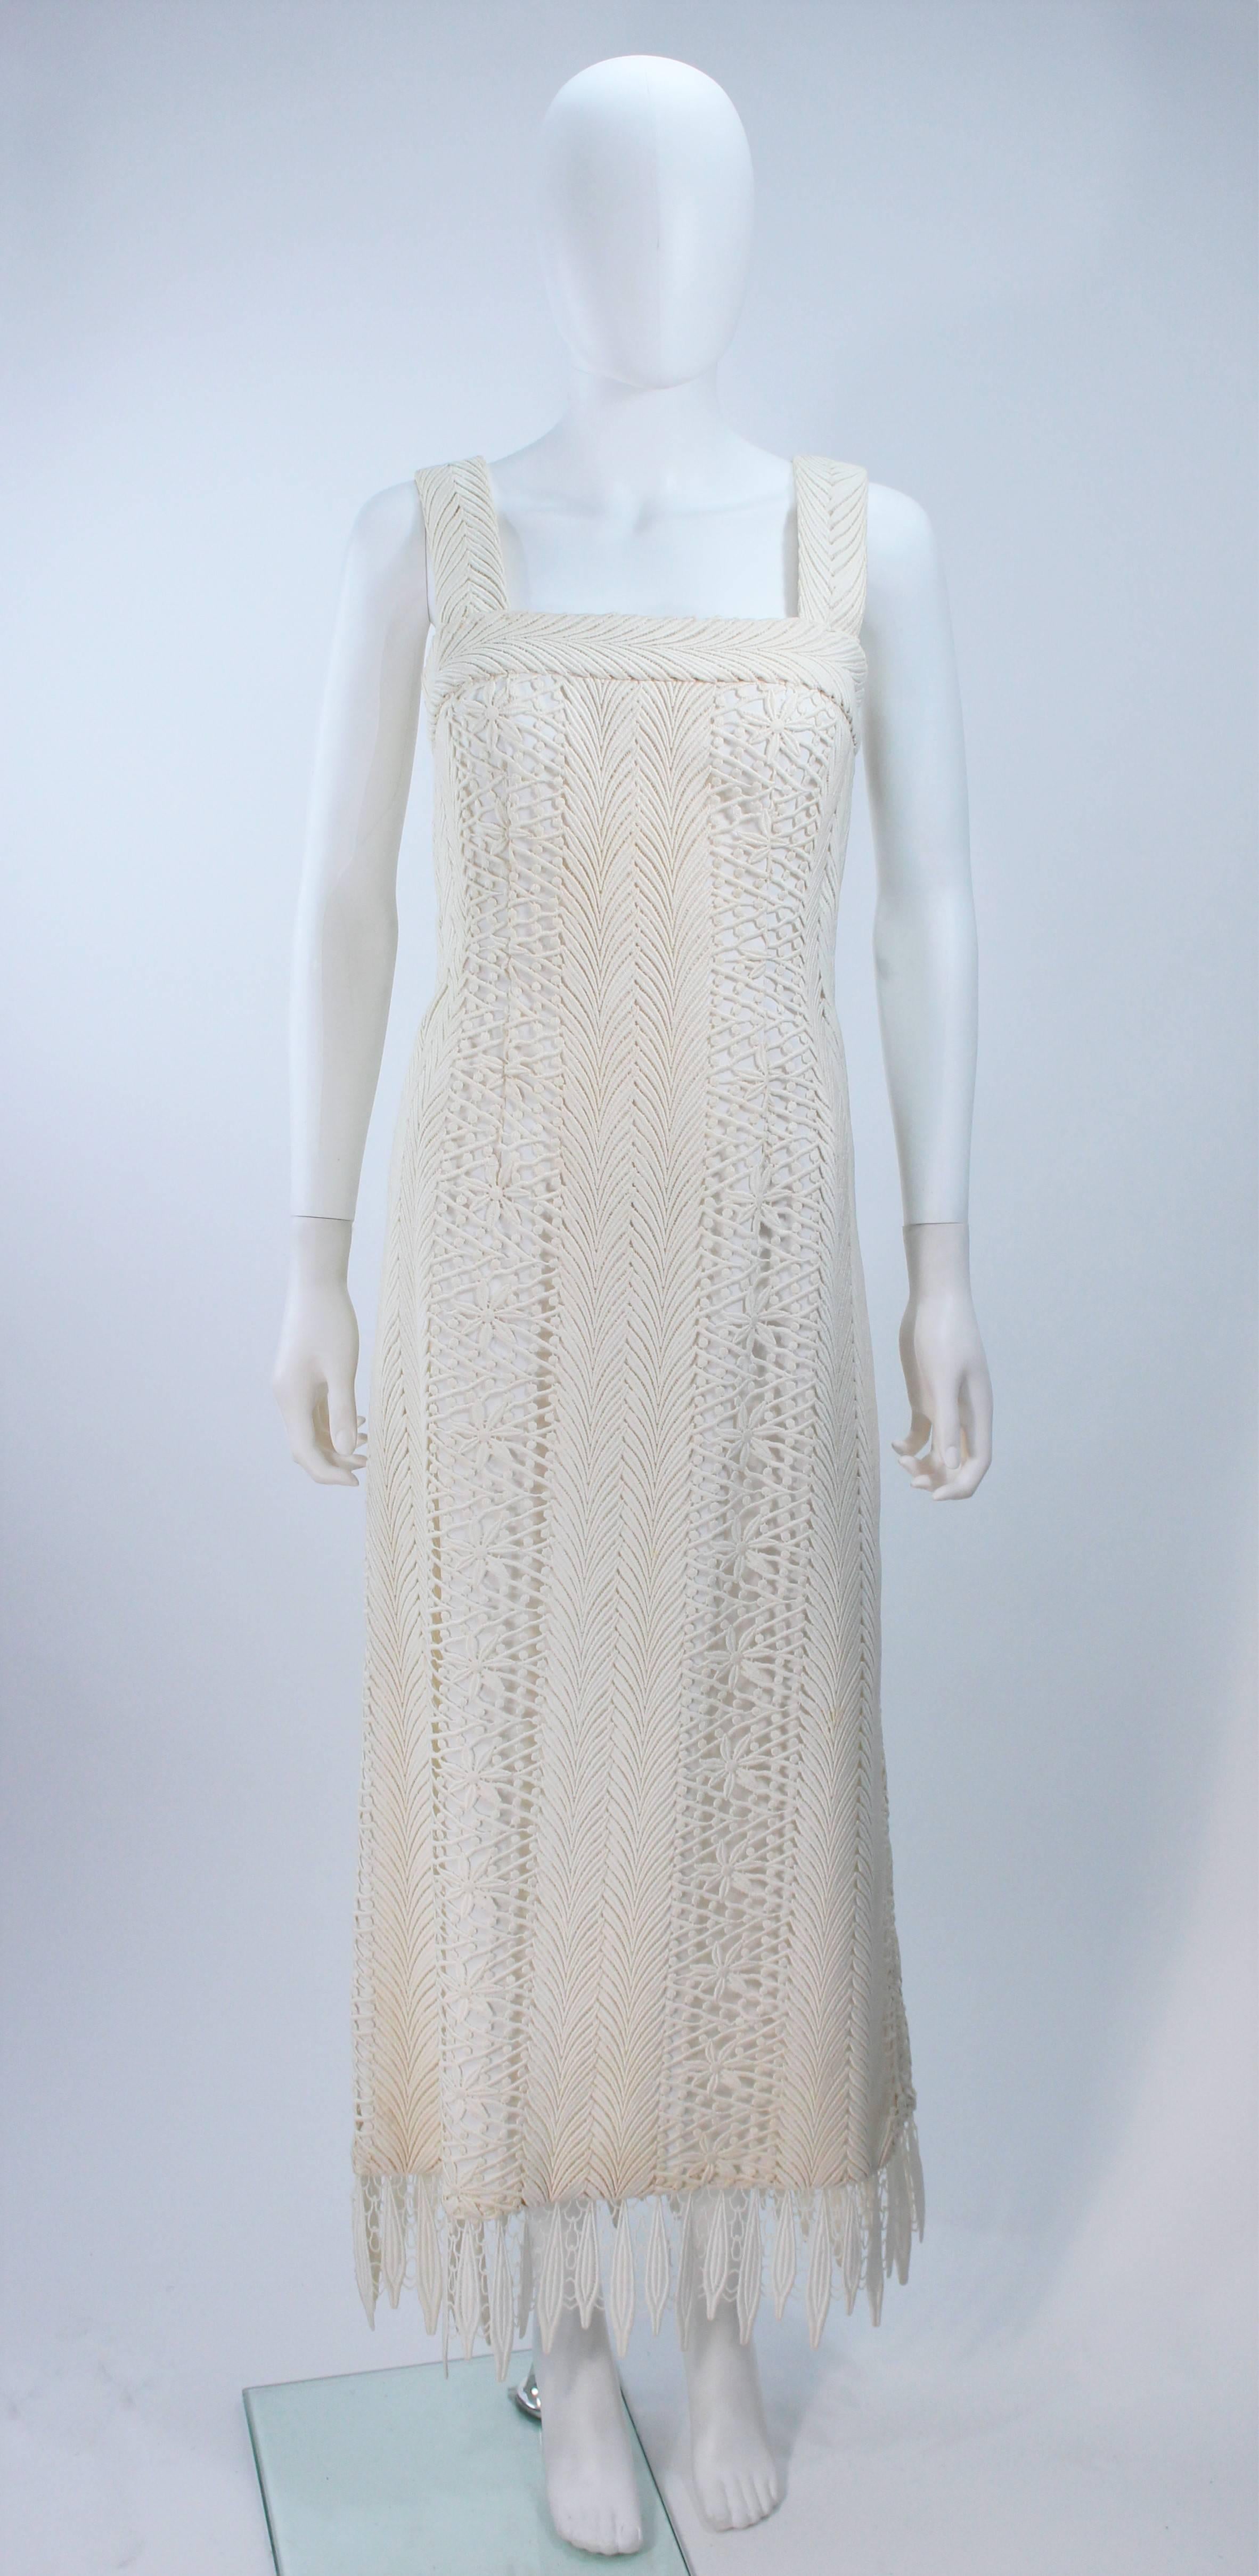  This dress is composed of an off white lace applique. Features an A-line style with side zipper. In great vintage condition. 

  **Please cross-reference measurements for personal accuracy. Size in description box is an estimation.

Measures